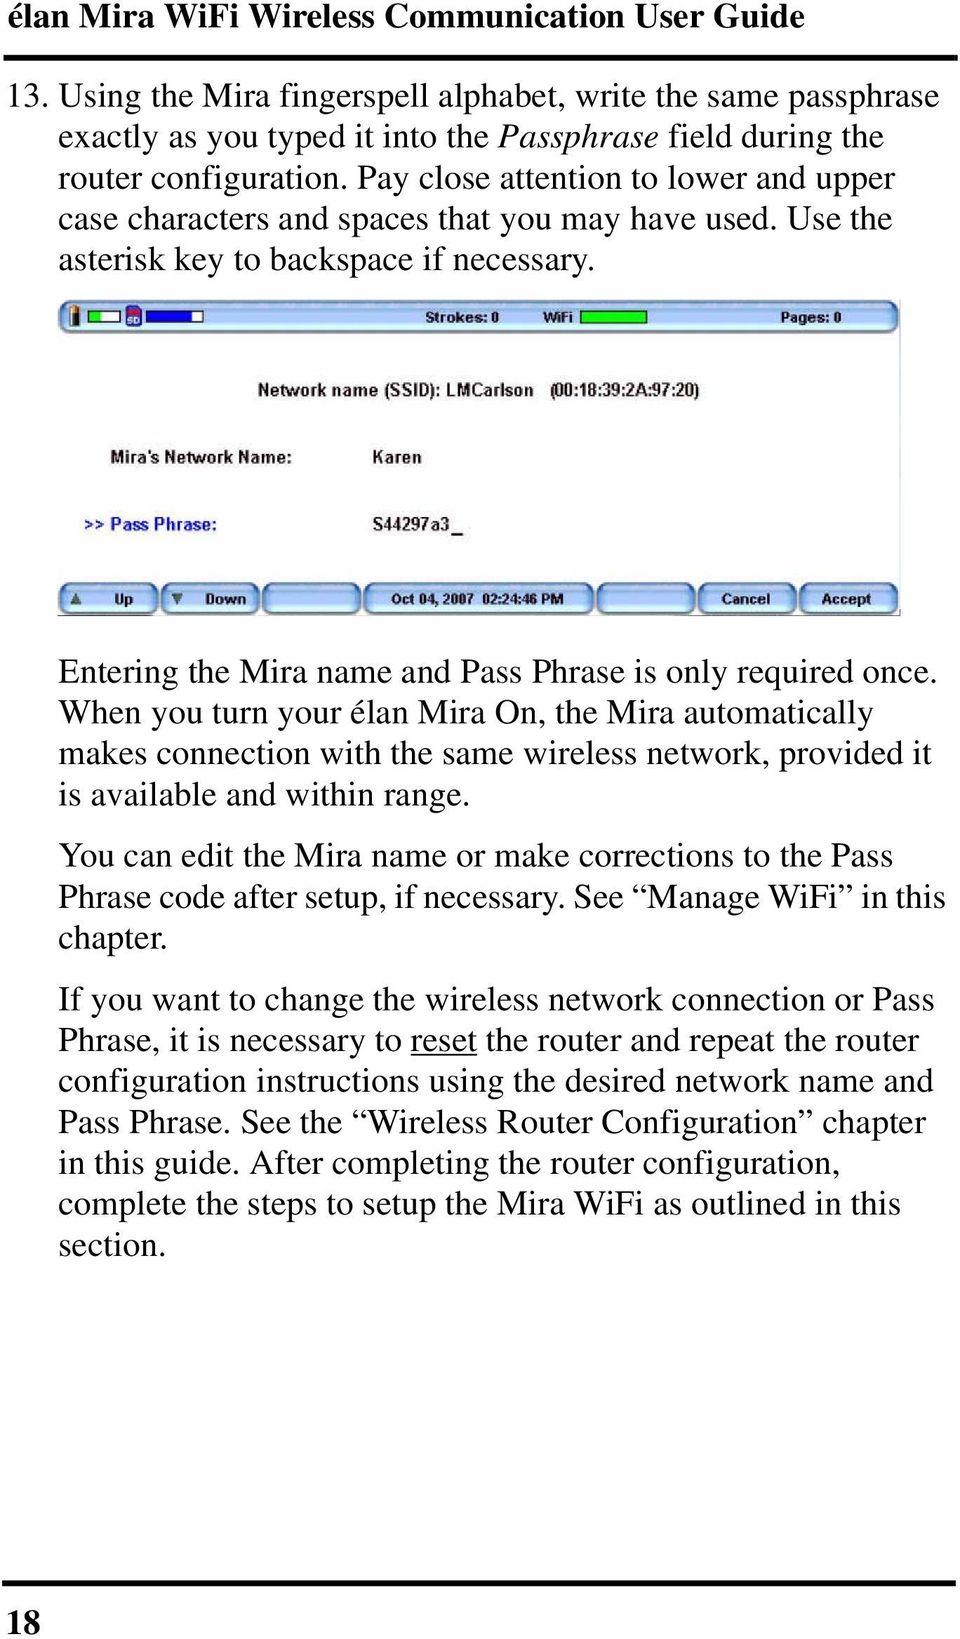 When you turn your élan Mira On, the Mira automatically makes connection with the same wireless network, provided it is available and within range.